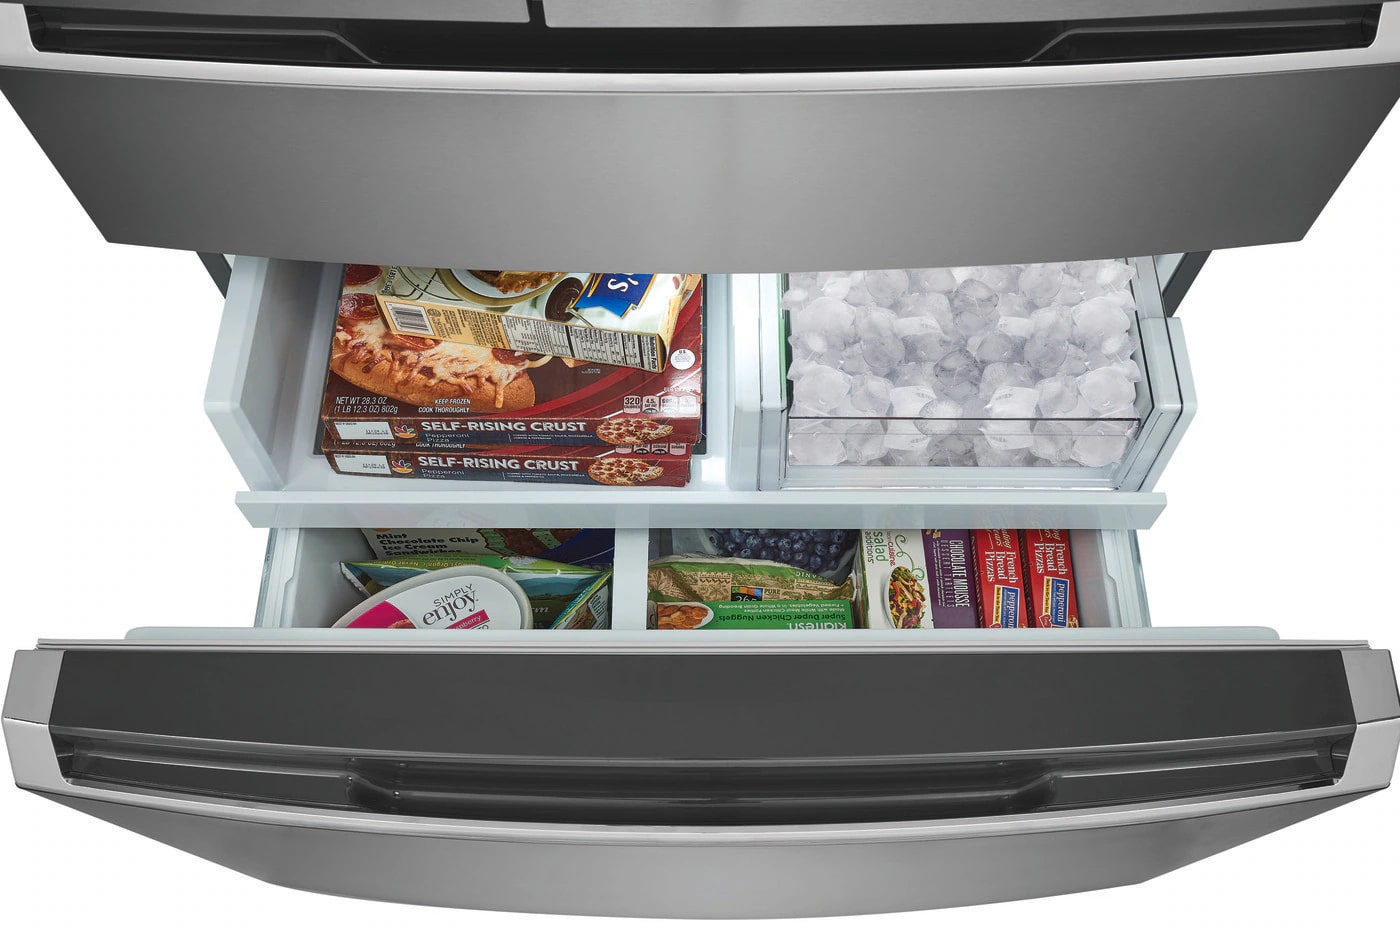 Frigidaire Gallery - 35.9 Inch 22.1 cu. ft French Door Refrigerator in Stainless - GRMG2272CF